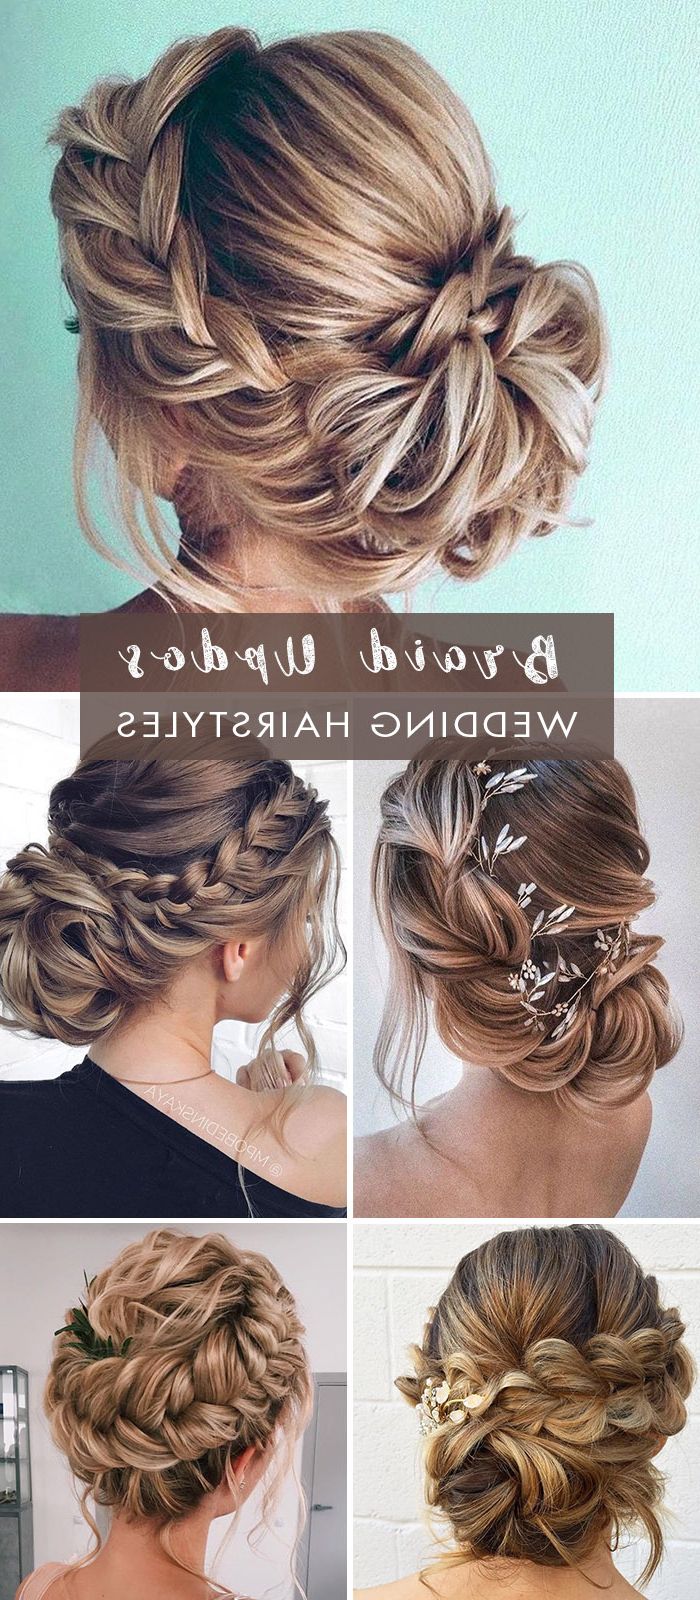 20 Easy And Perfect Updo Hairstyles For Weddings – Ewi Regarding Braided Updo For Long Hair (View 14 of 25)